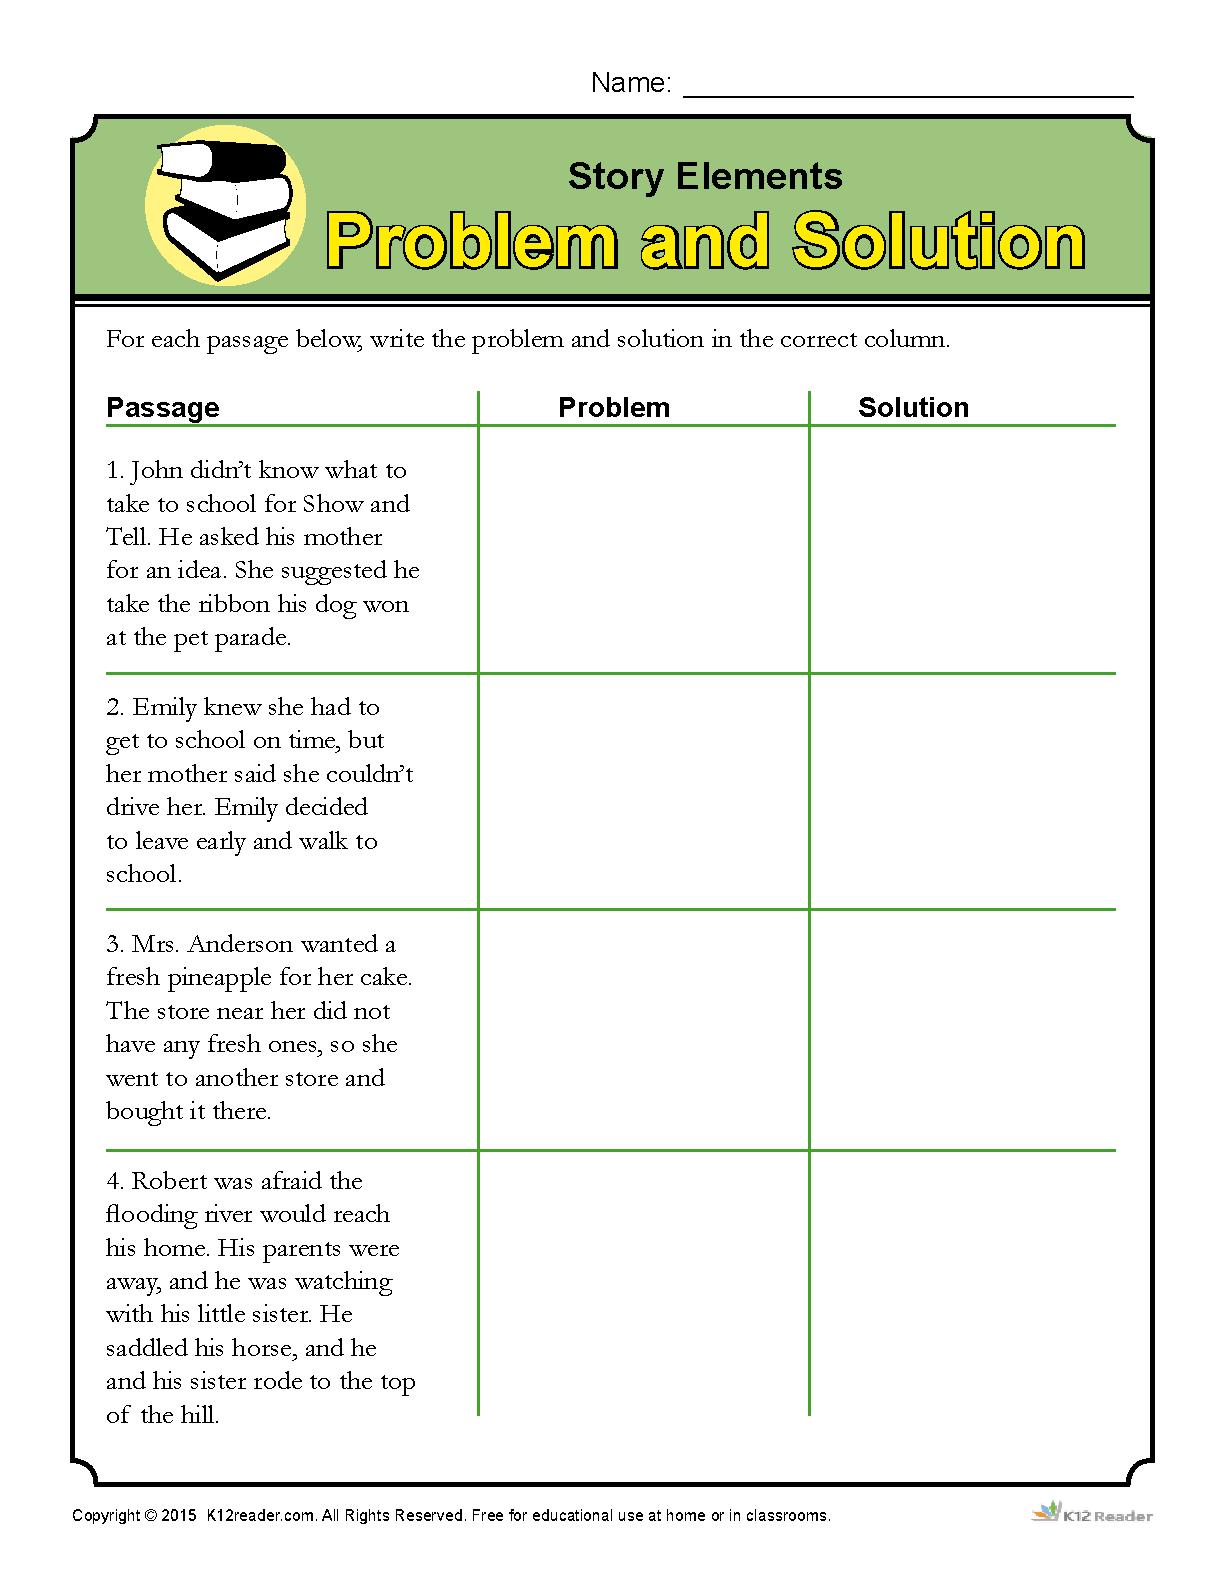 problem and solution story examples pdf